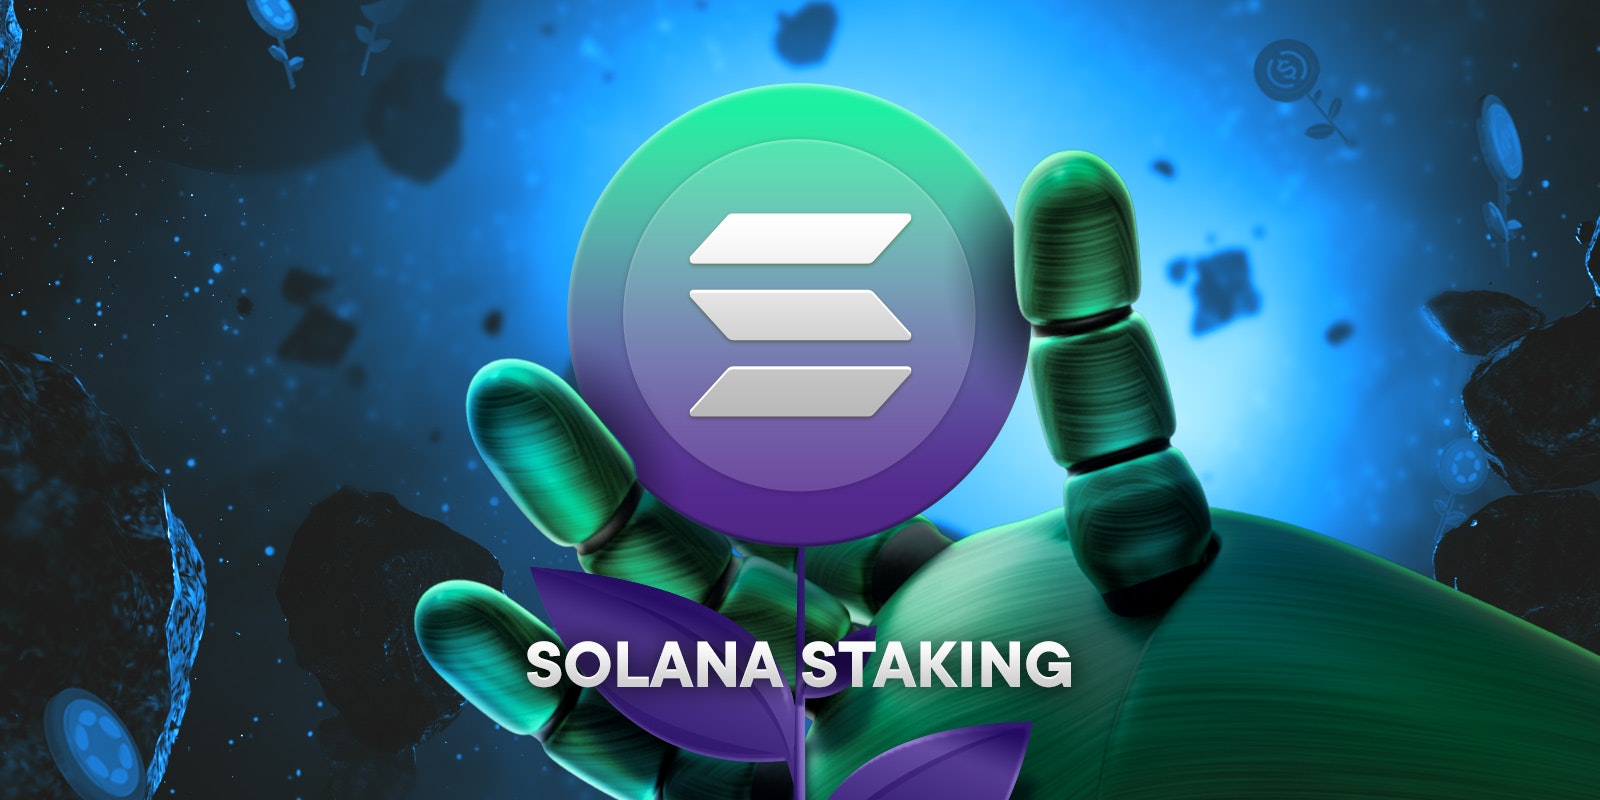 SOL staking